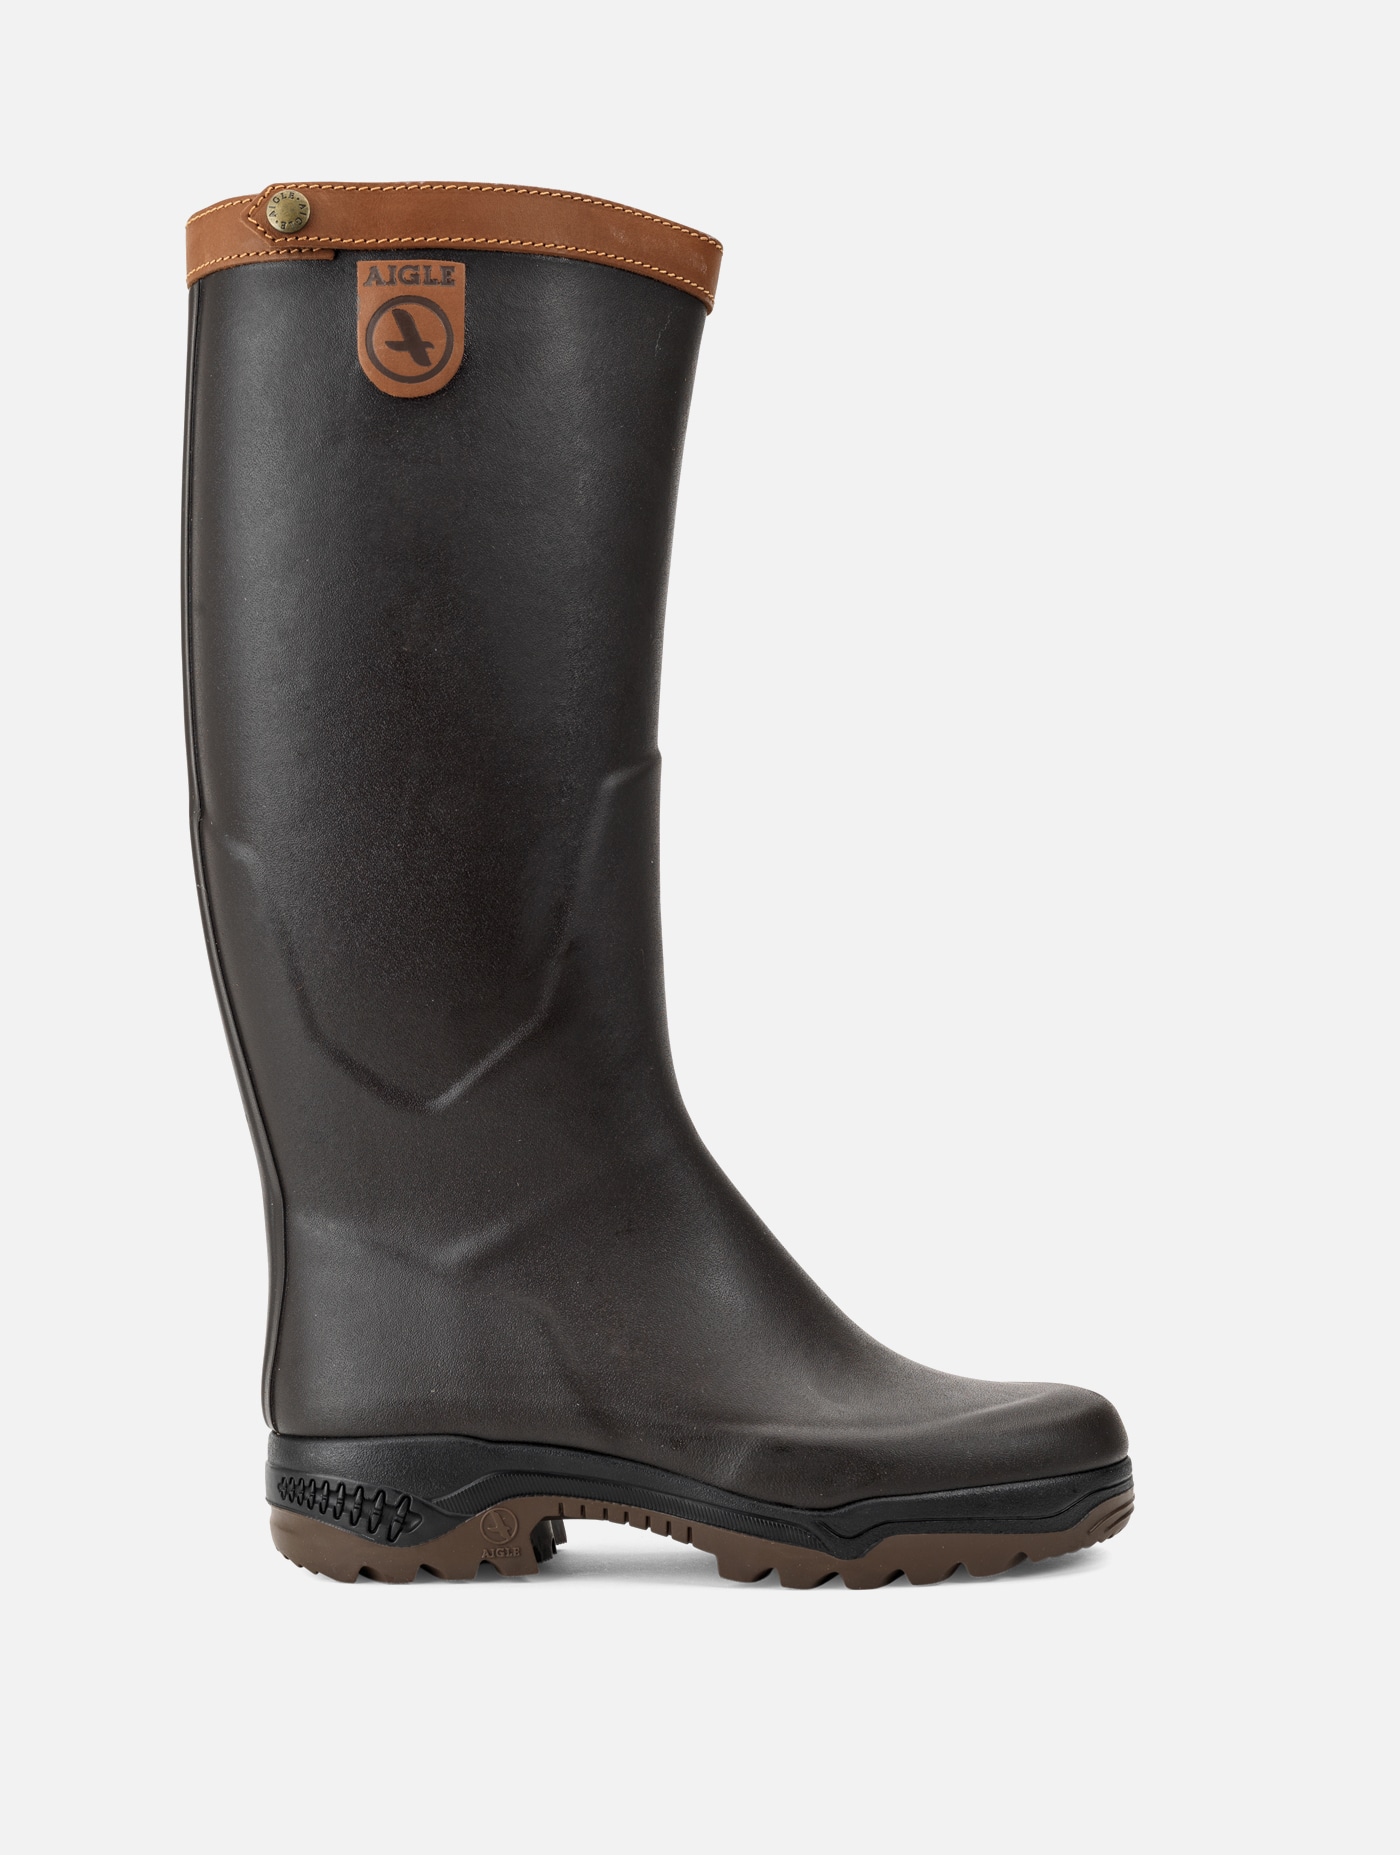 Aigle - Men's leather-lined hunting boots Brun - Parcours® 2 signature ...